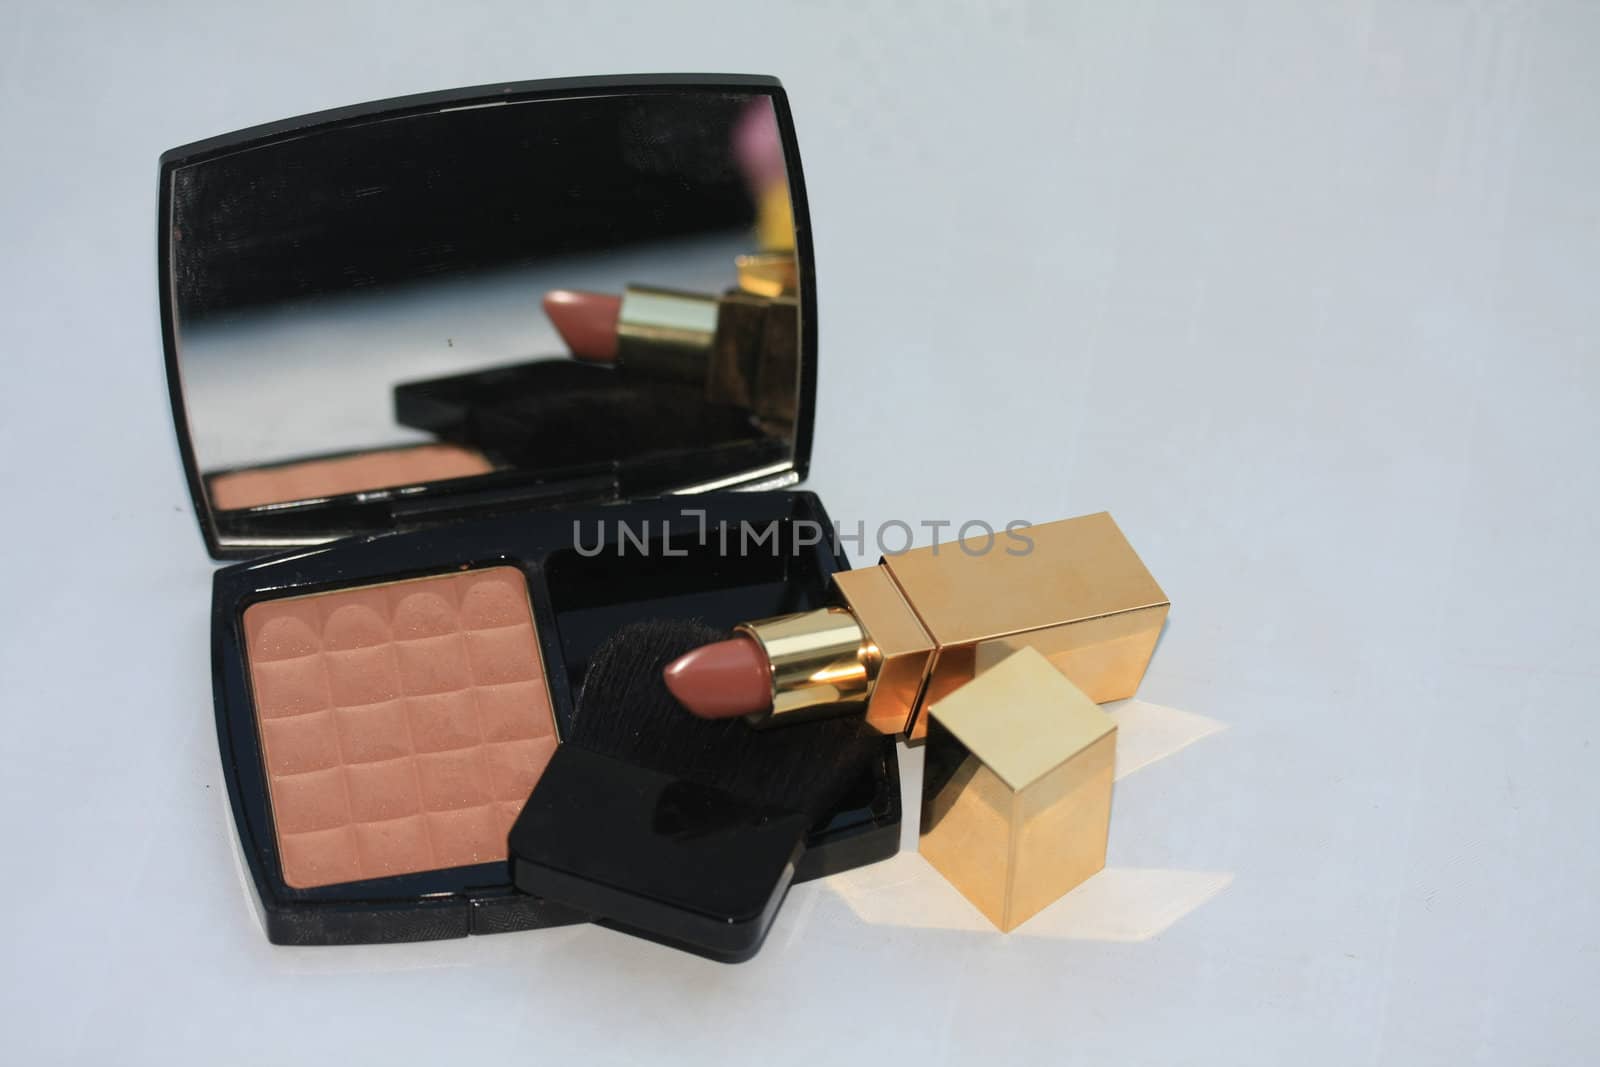 A blusher and a lipstiick in luxury box